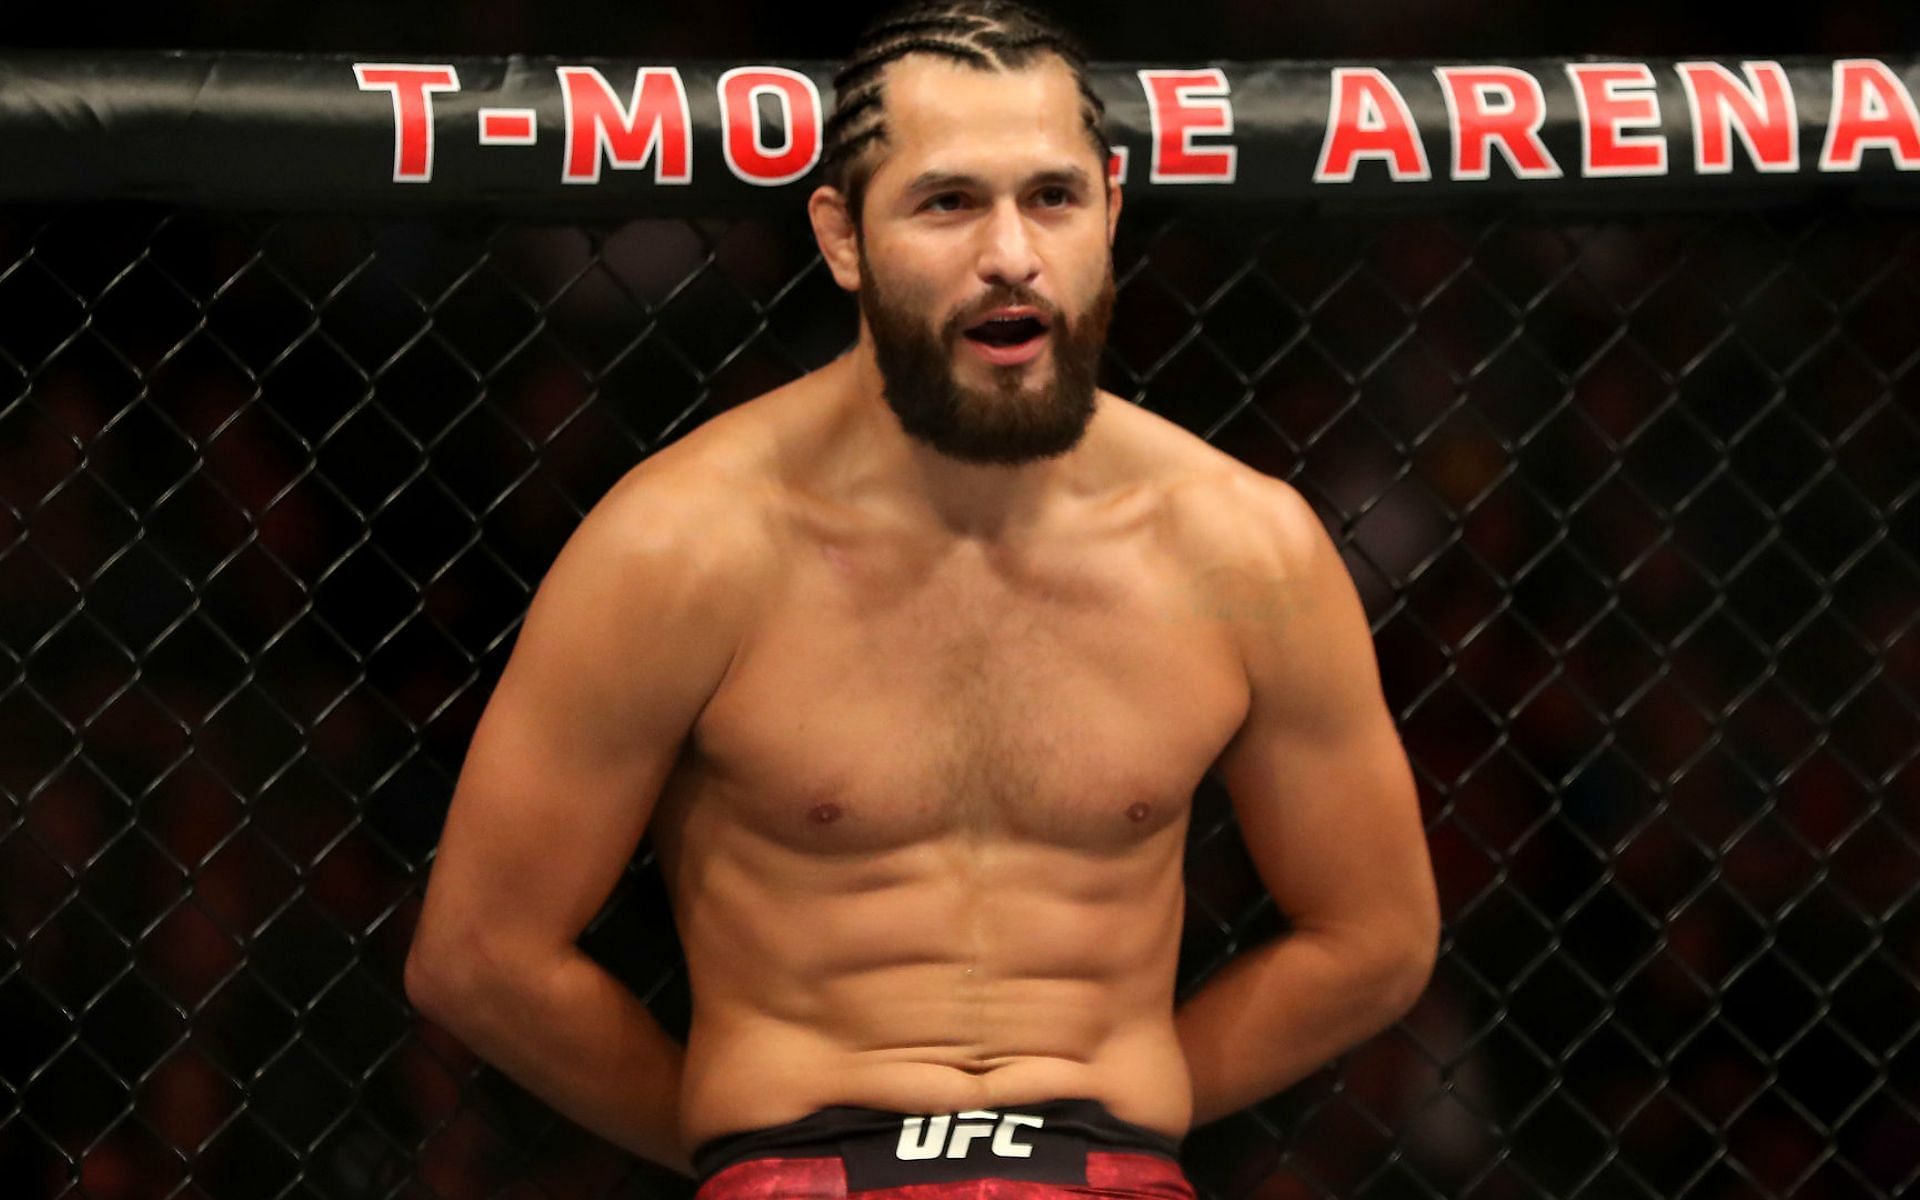 Jorge Masvidal is in a must-win situation against former teammate Colby Covington this weekend